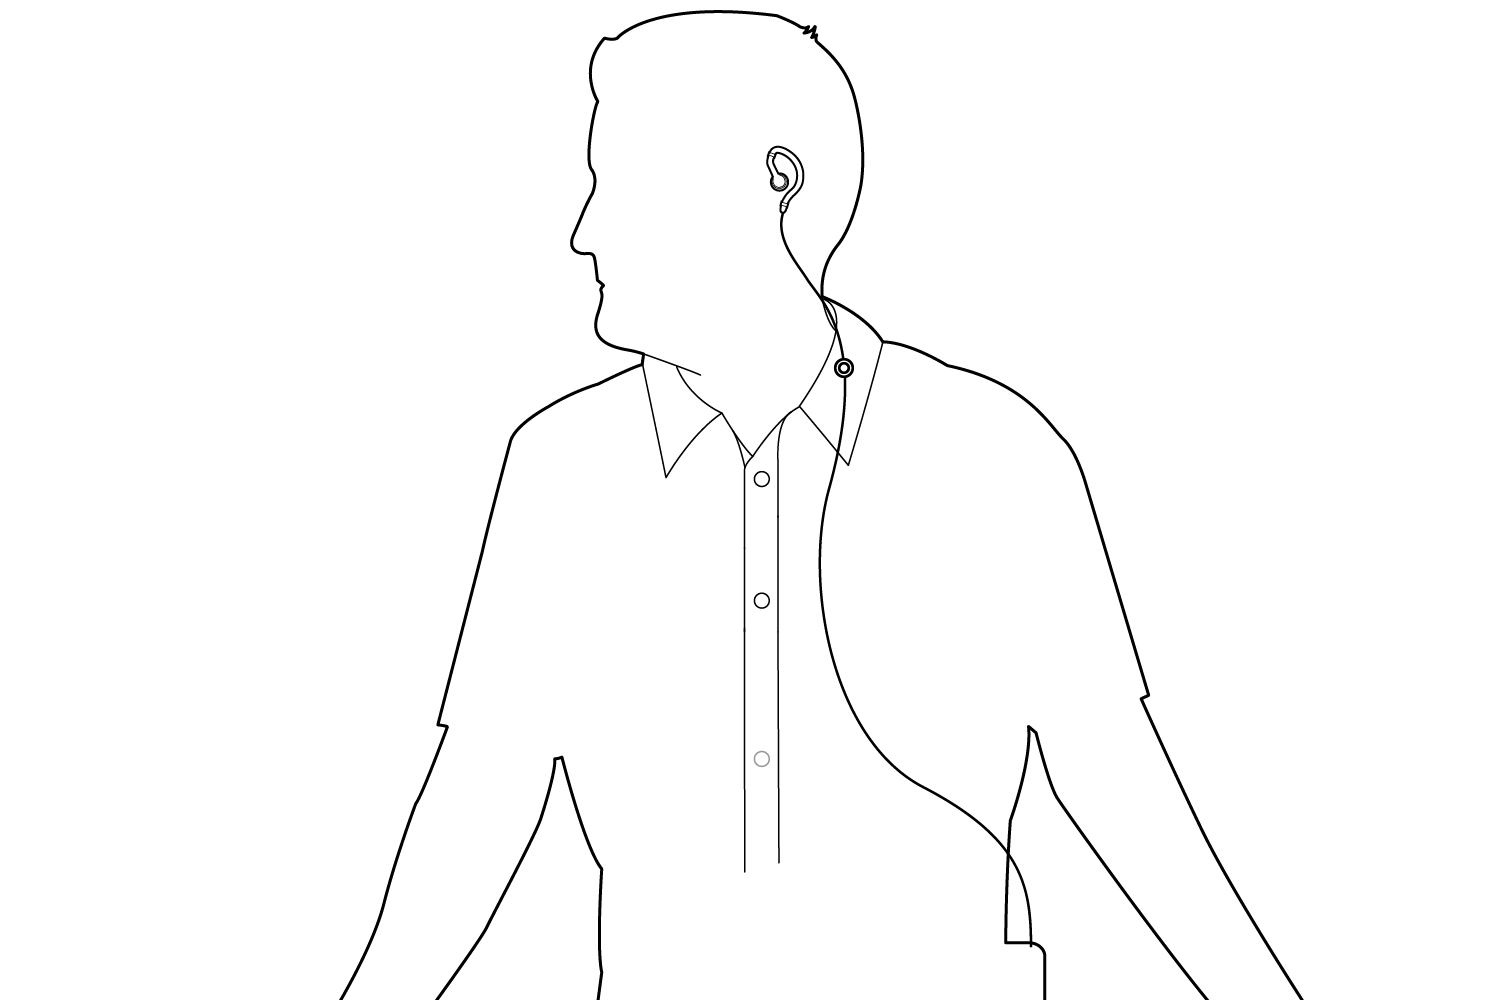 Wearing The One-Wire Headset Diagram